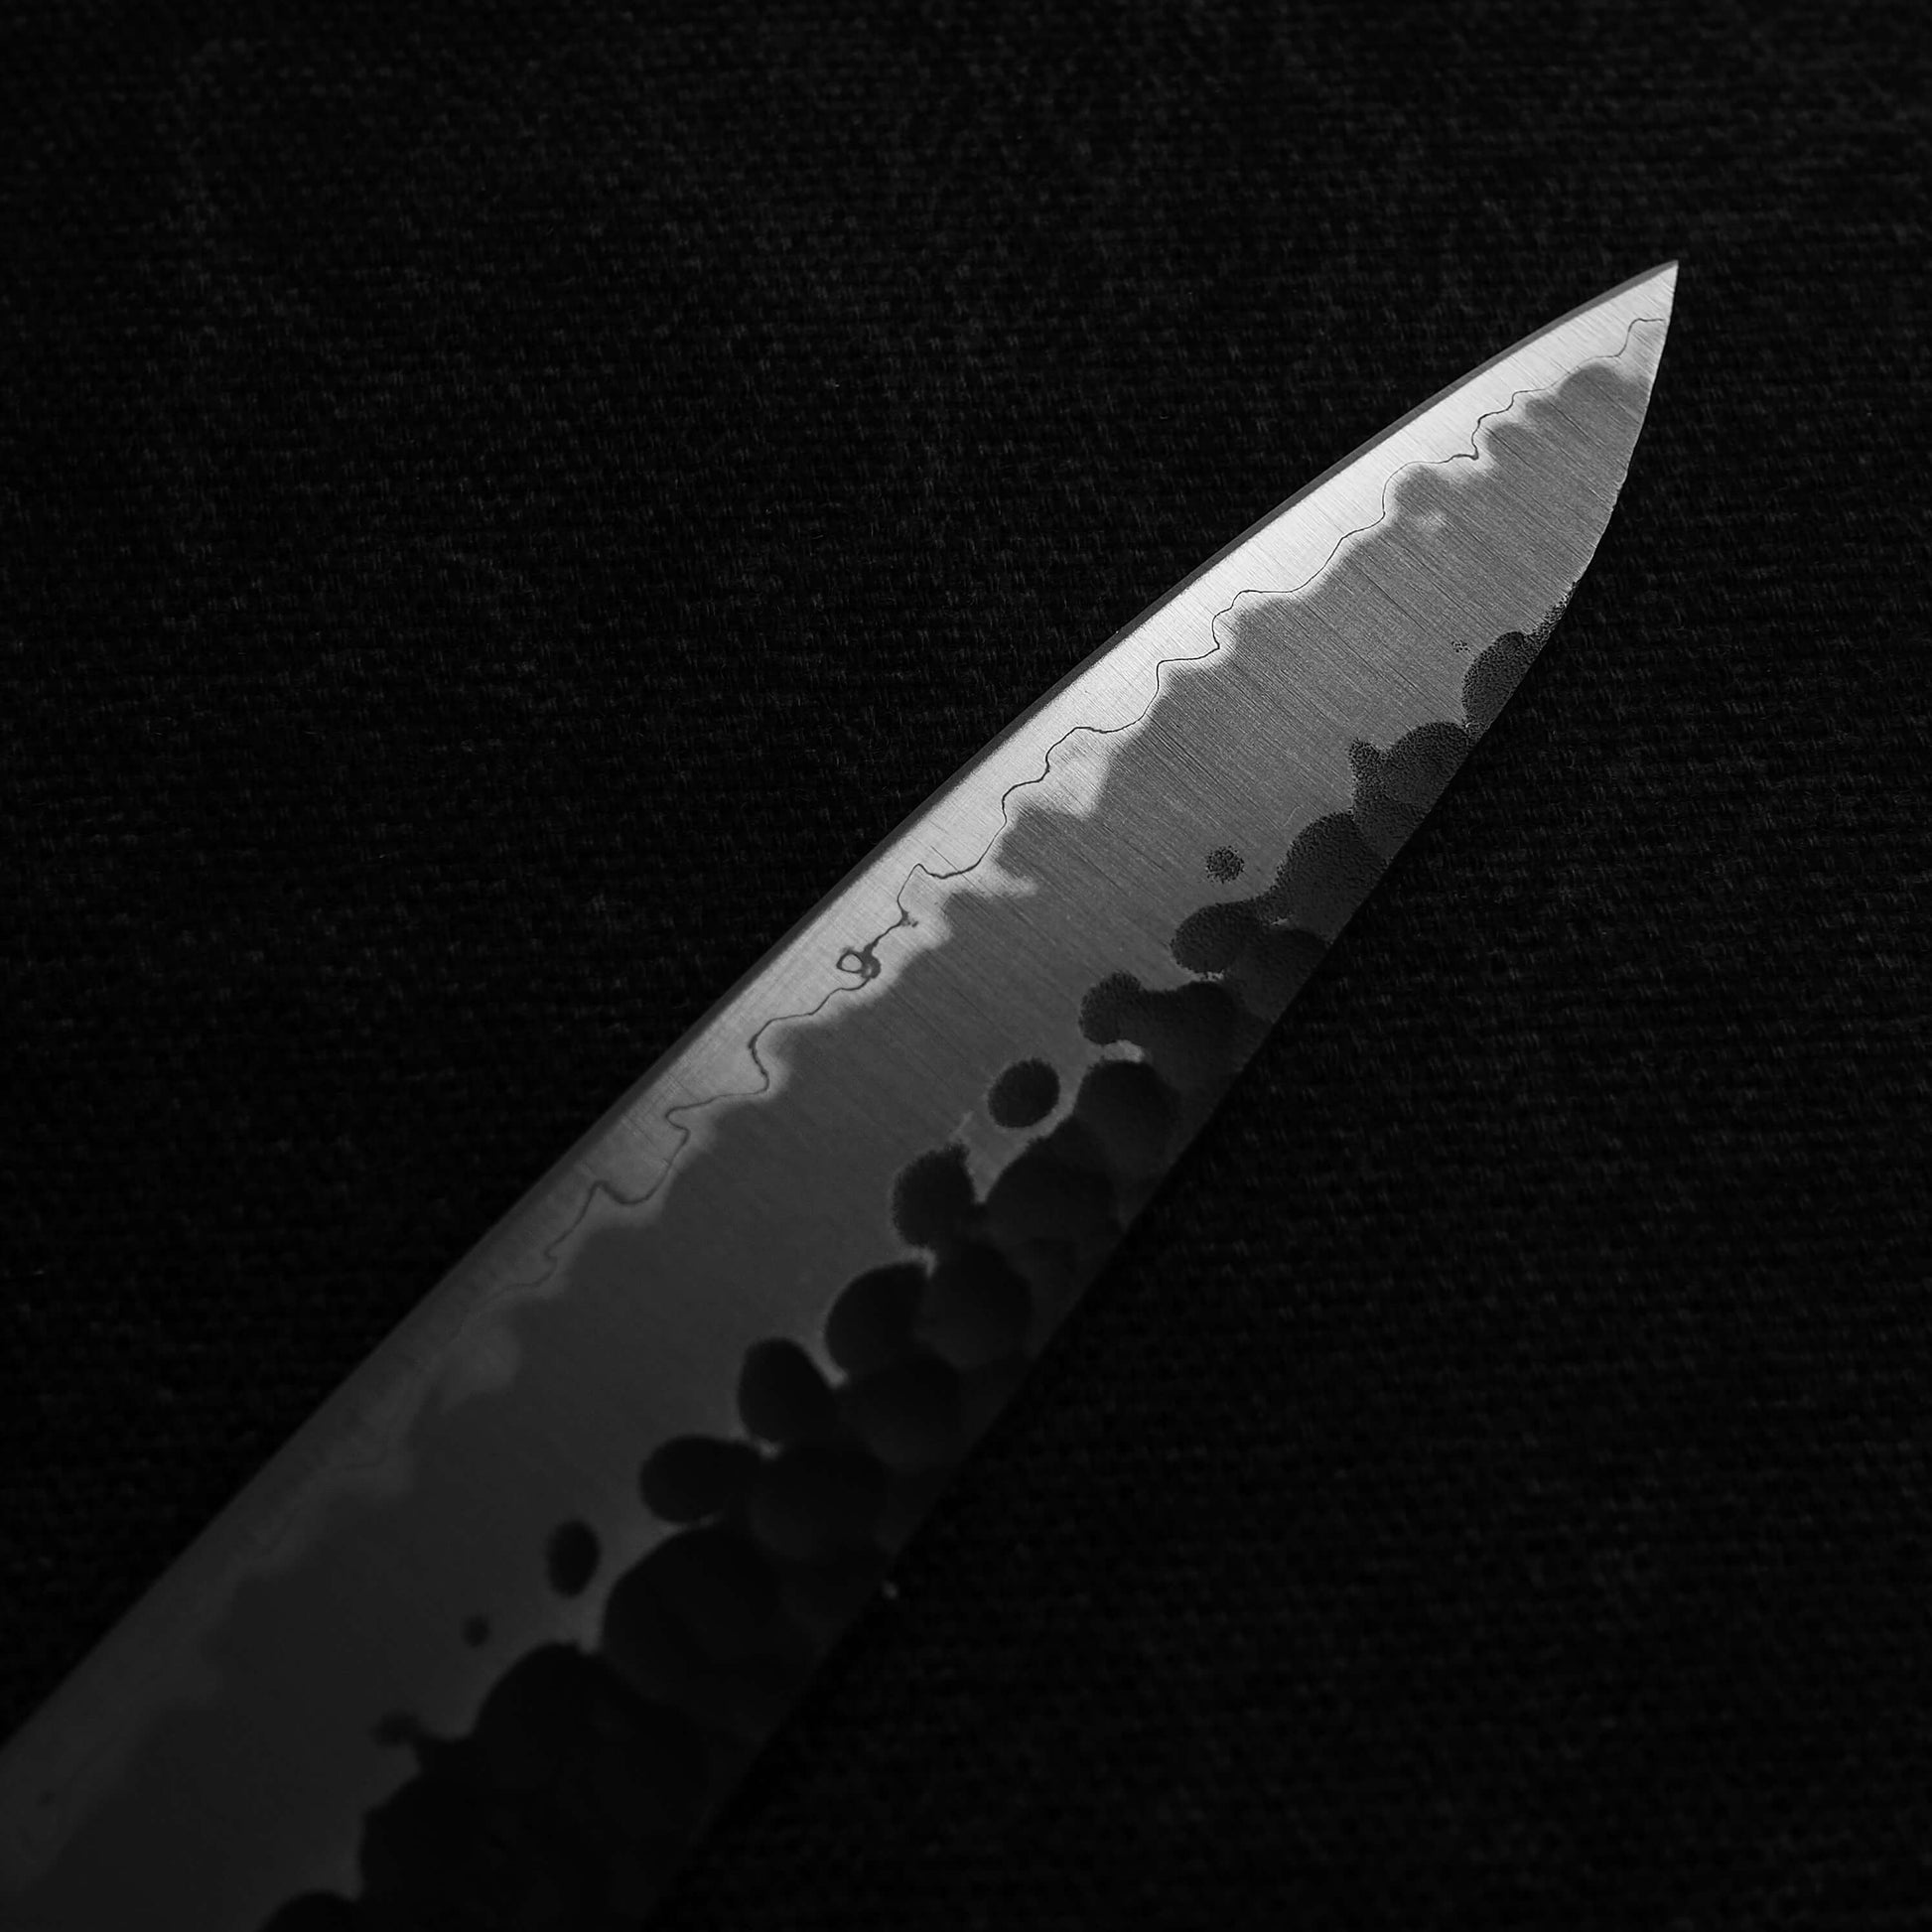 Close up view of Ittosai Kotetsu tsuchime kurouchi aogami super petty knife. Image focuses on the tip area of the left side of the knife